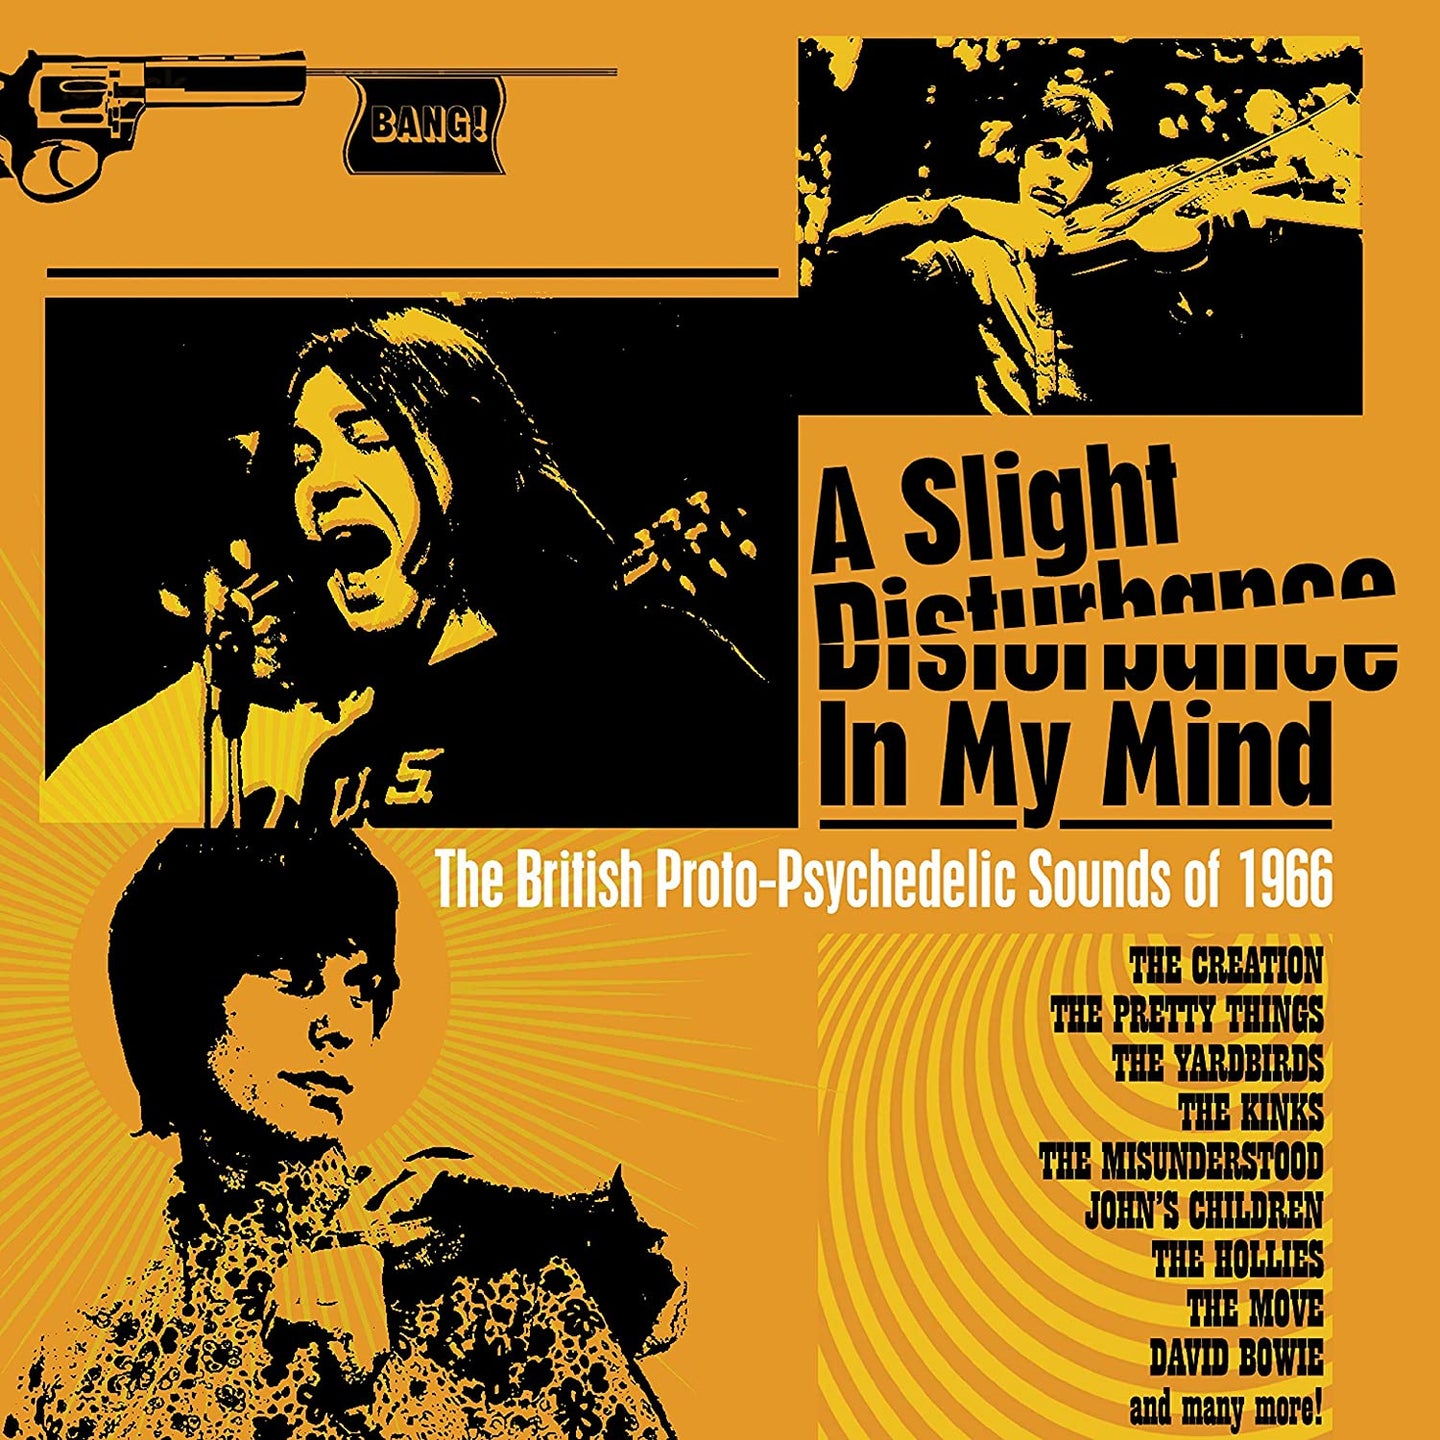 A Slight Disturbance In My Mind - The British Proto-Psychedelic Sounds Of 1966